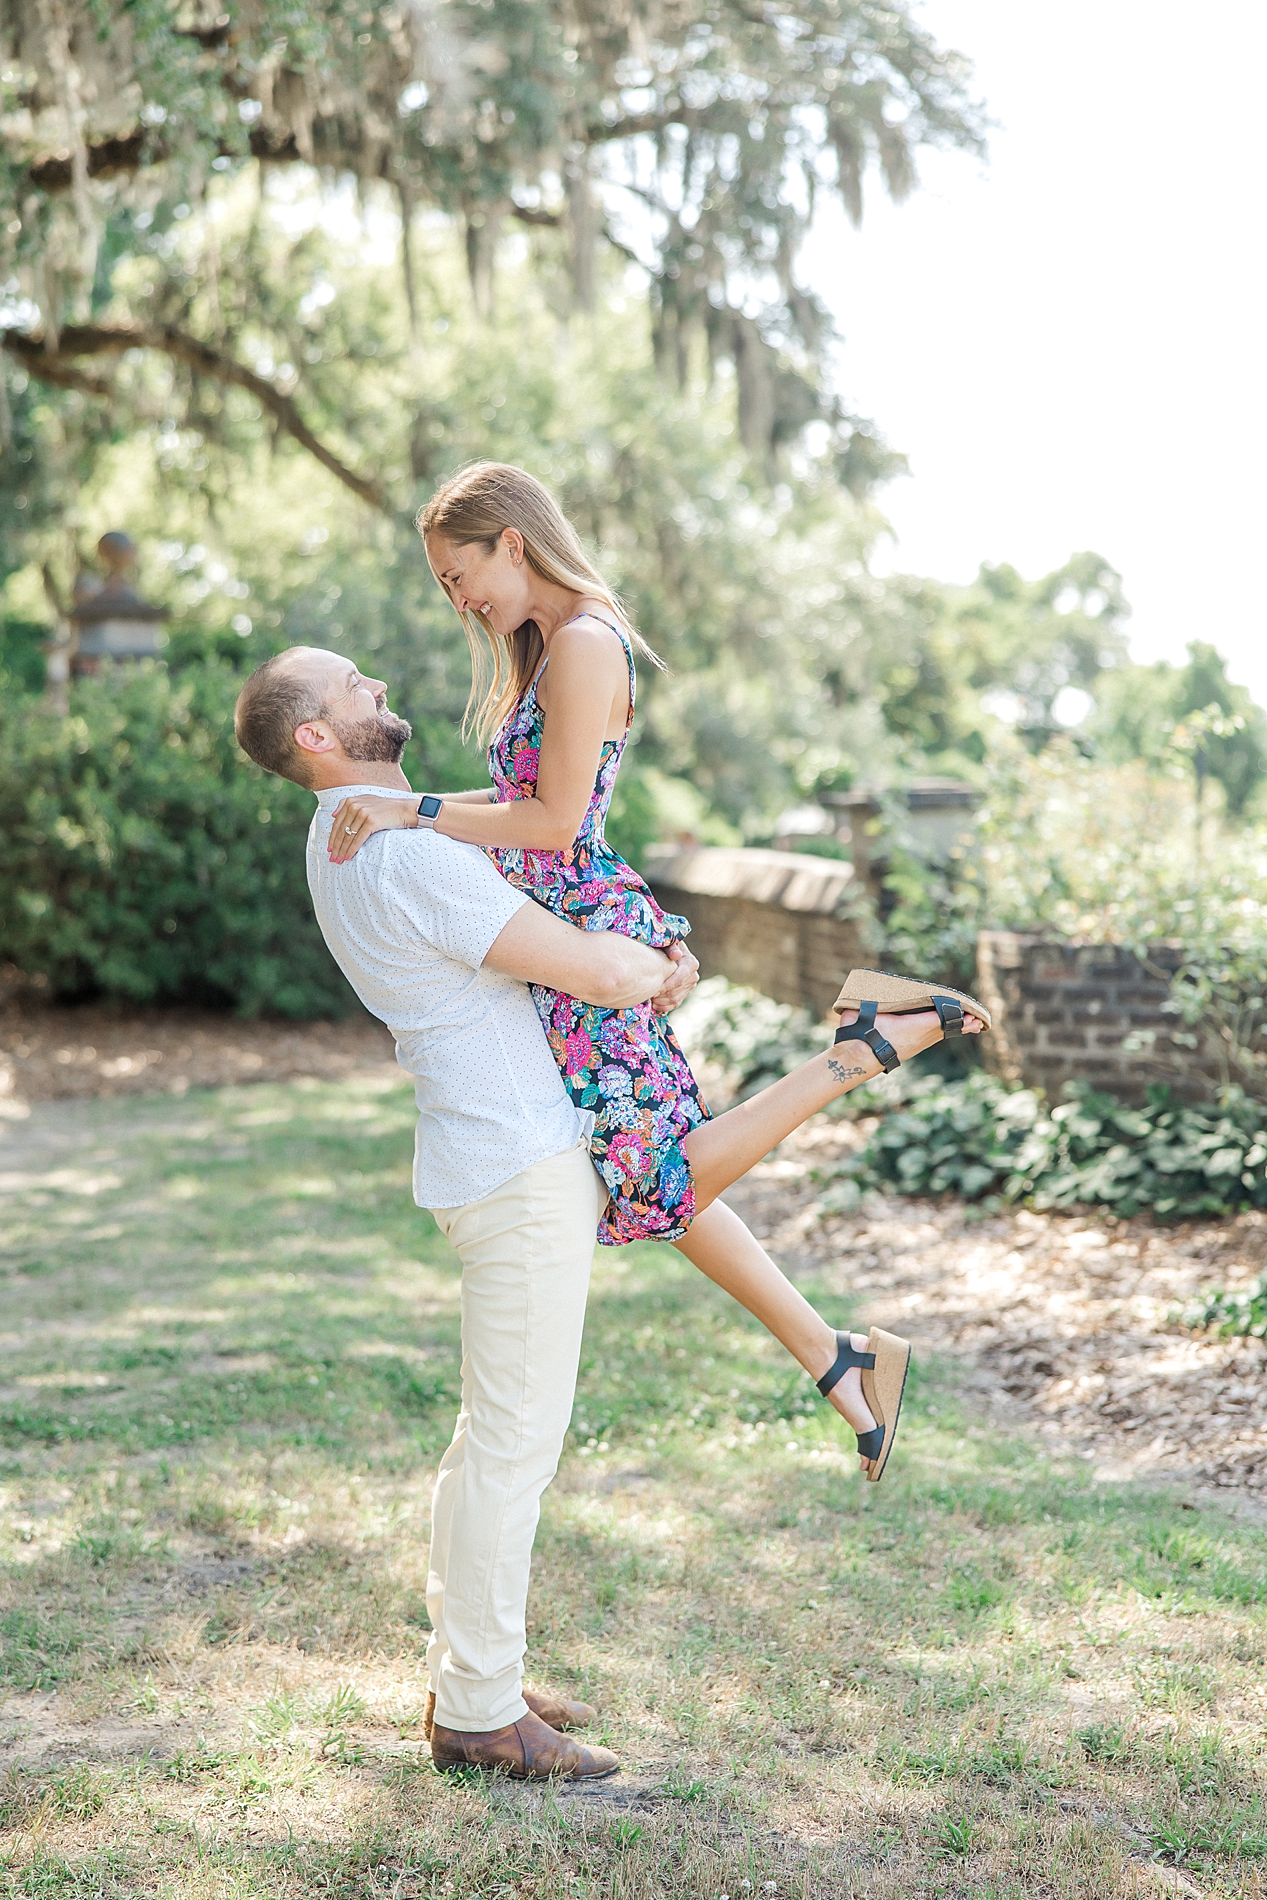 man lifts fiance up in SC during engagement session